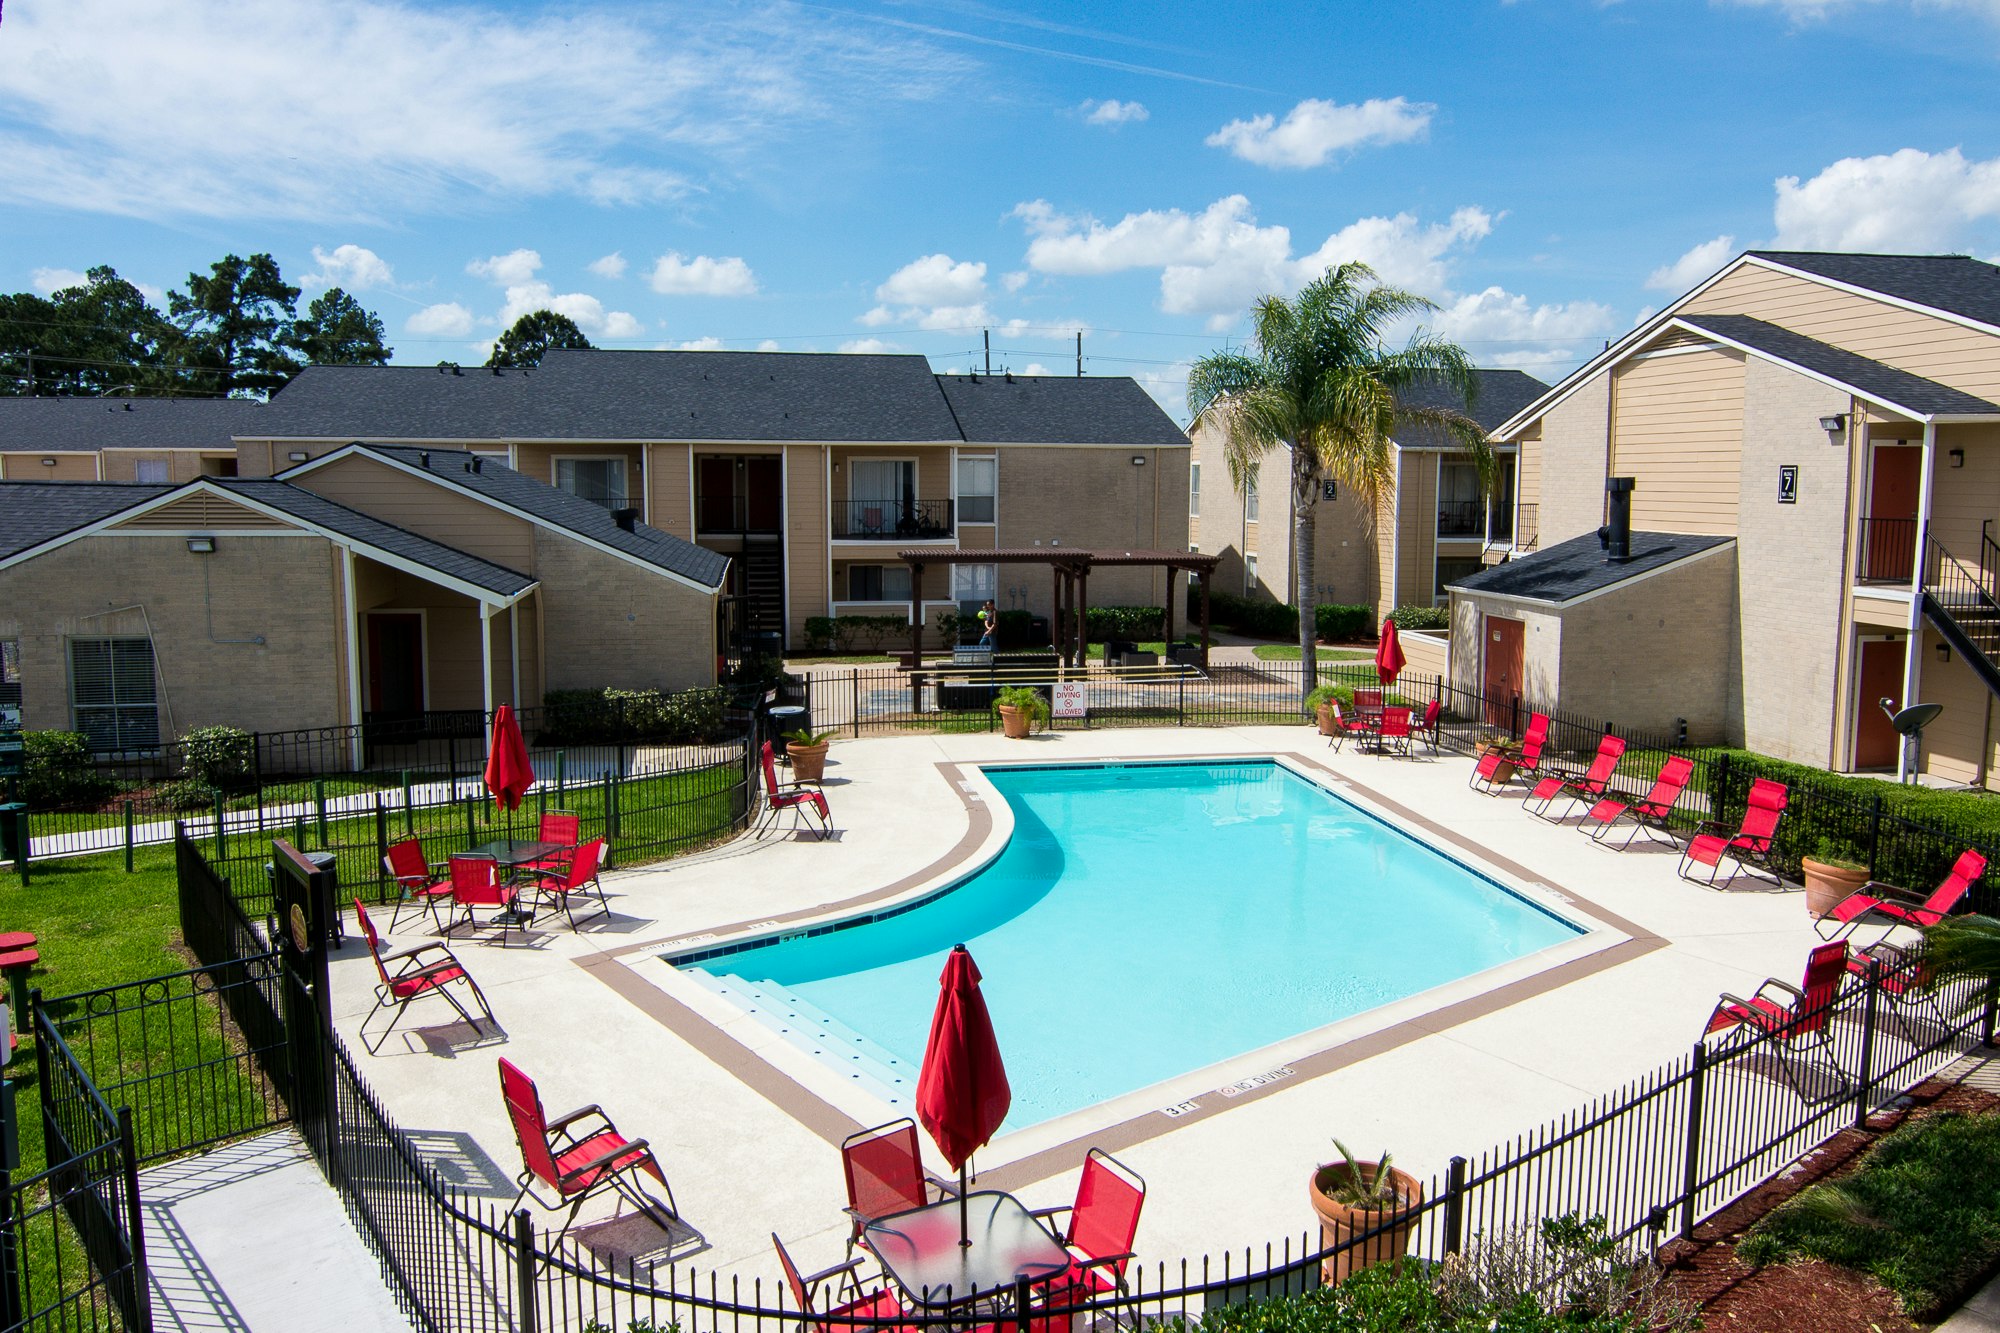 Apartments With 24 Hour Fitness Centers In Humble Tx Rockstar Apartments